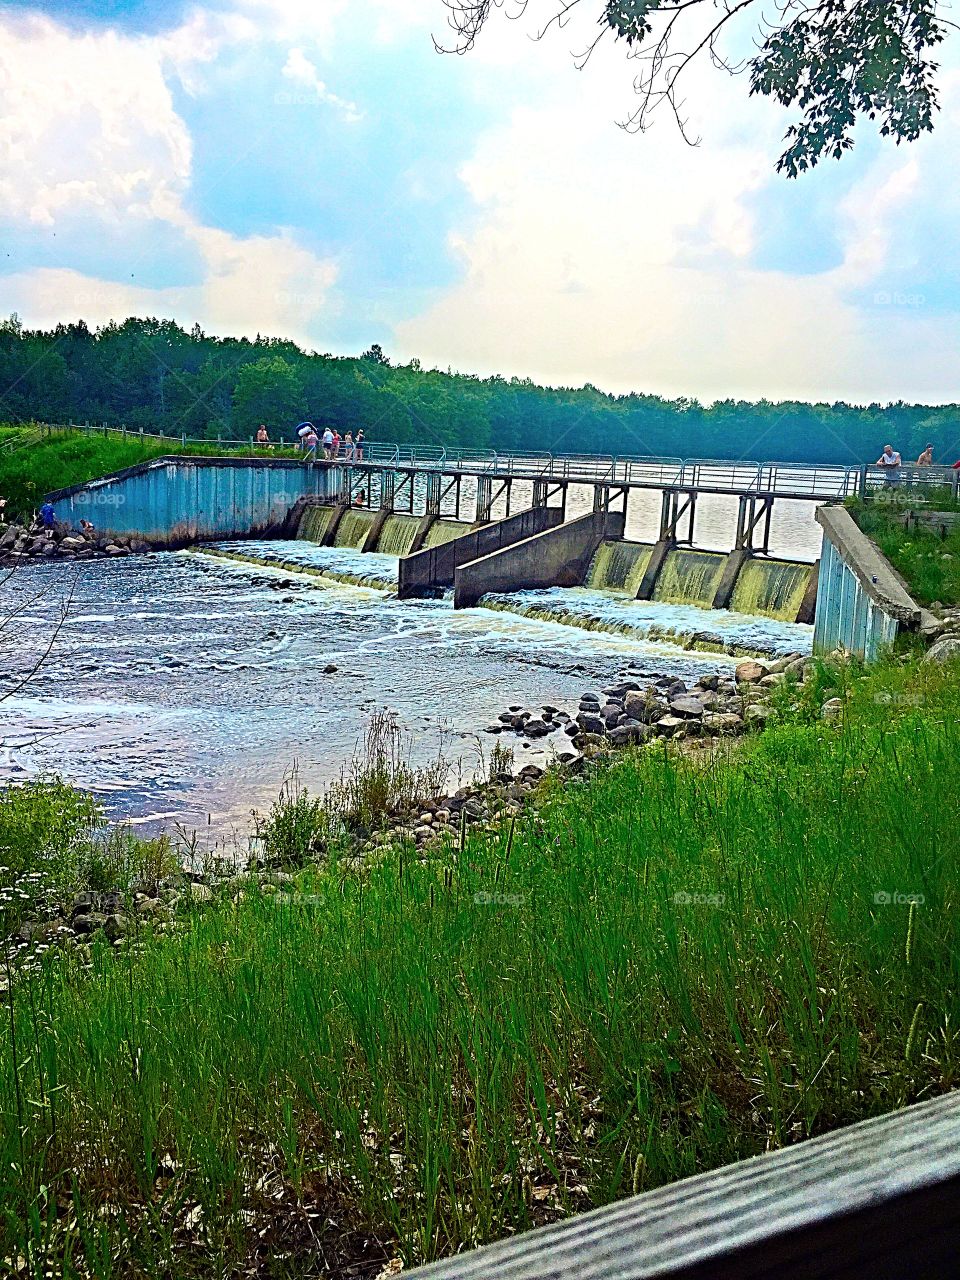 View From Below the Dam. Found this great camp site and park with a dam to walk across. Fun day!!